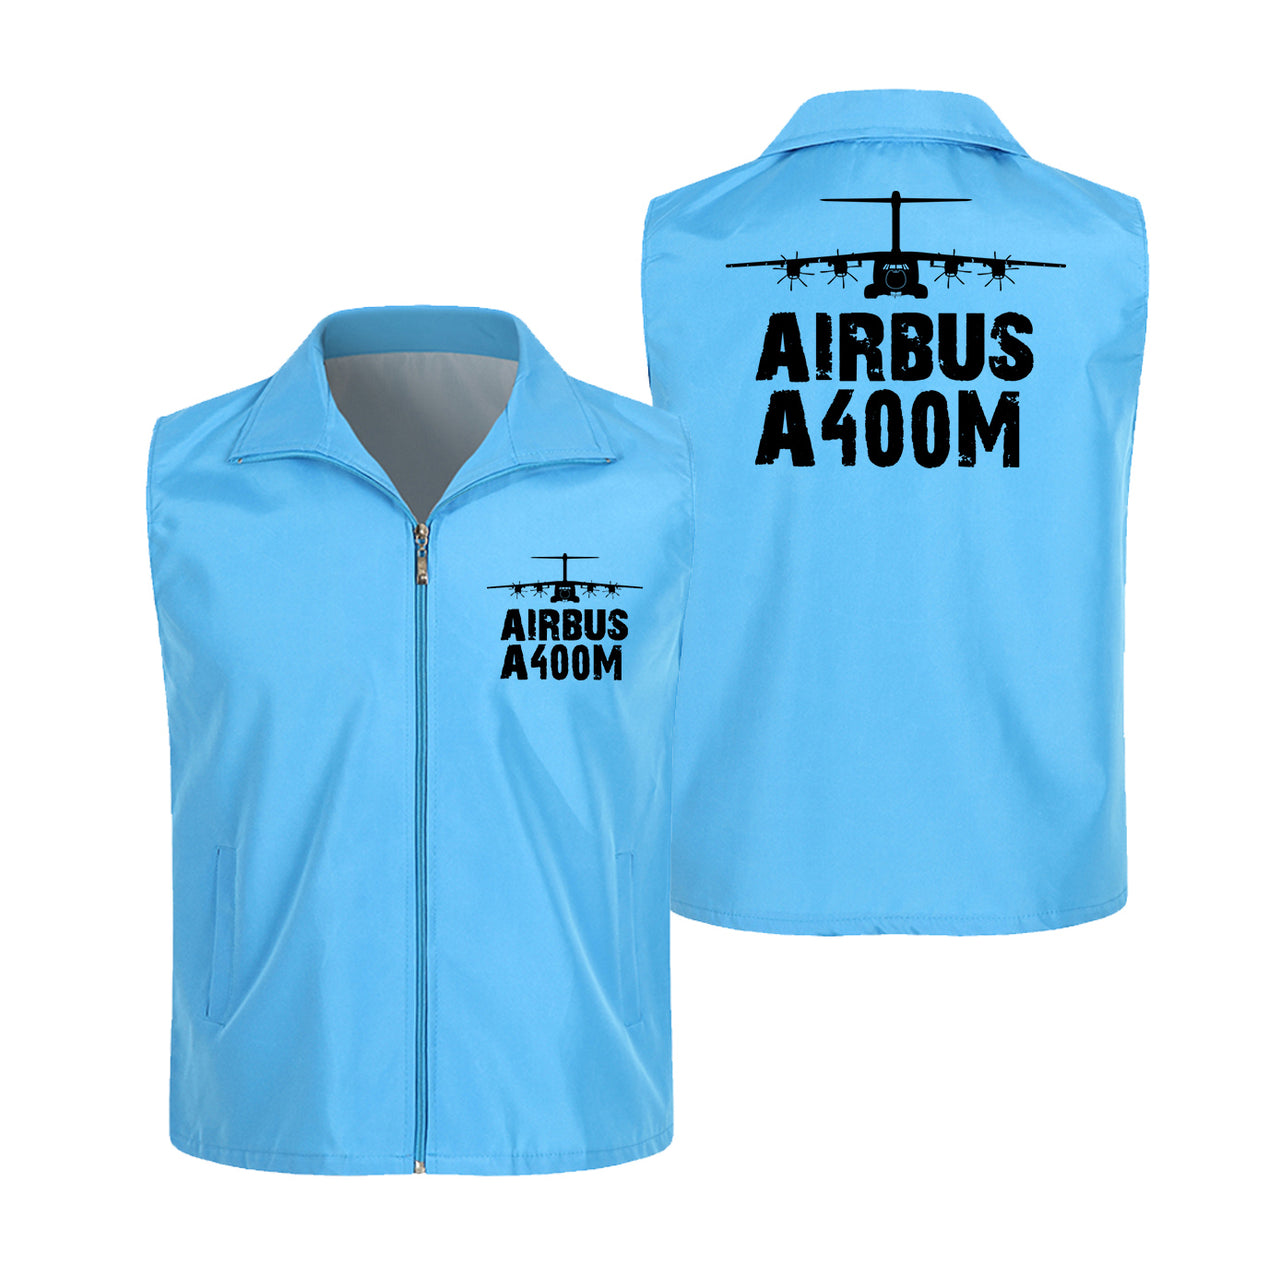 Airbus A400M & Plane Designed Thin Style Vests